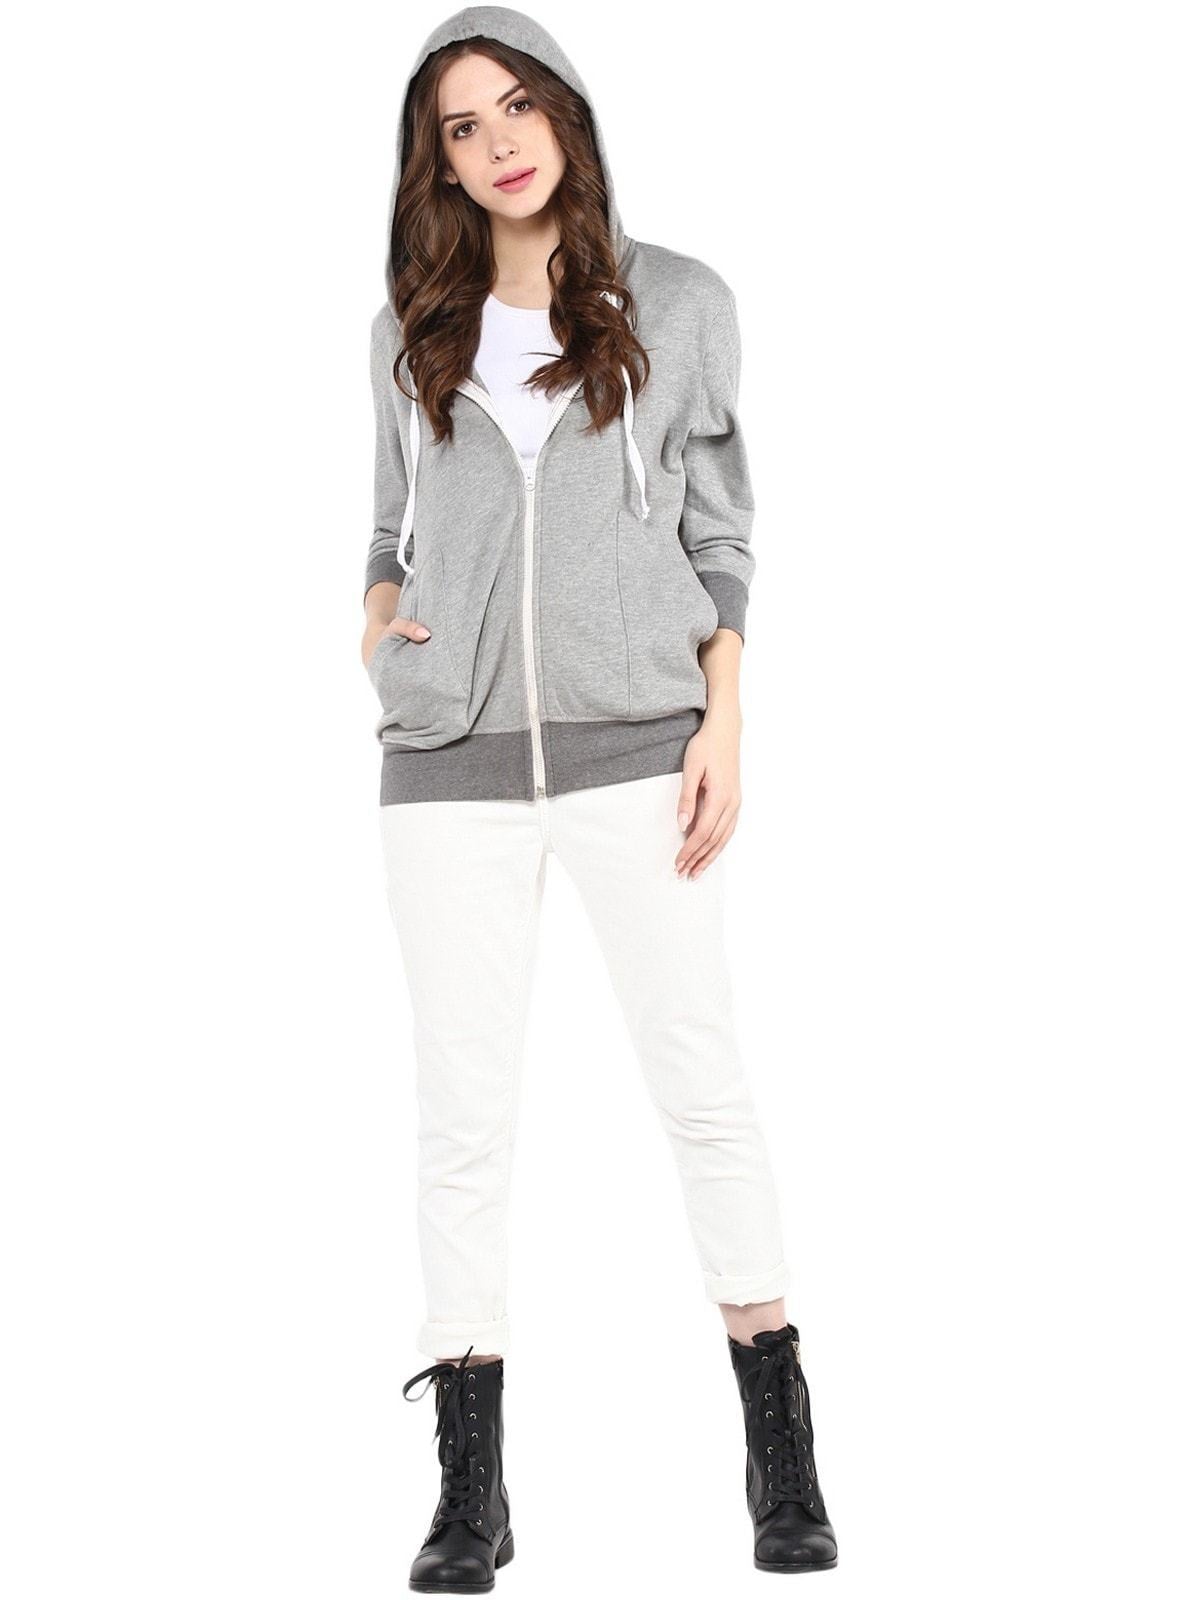 Women's Solid Hooded Sweatshirts With Pockets - Pannkh